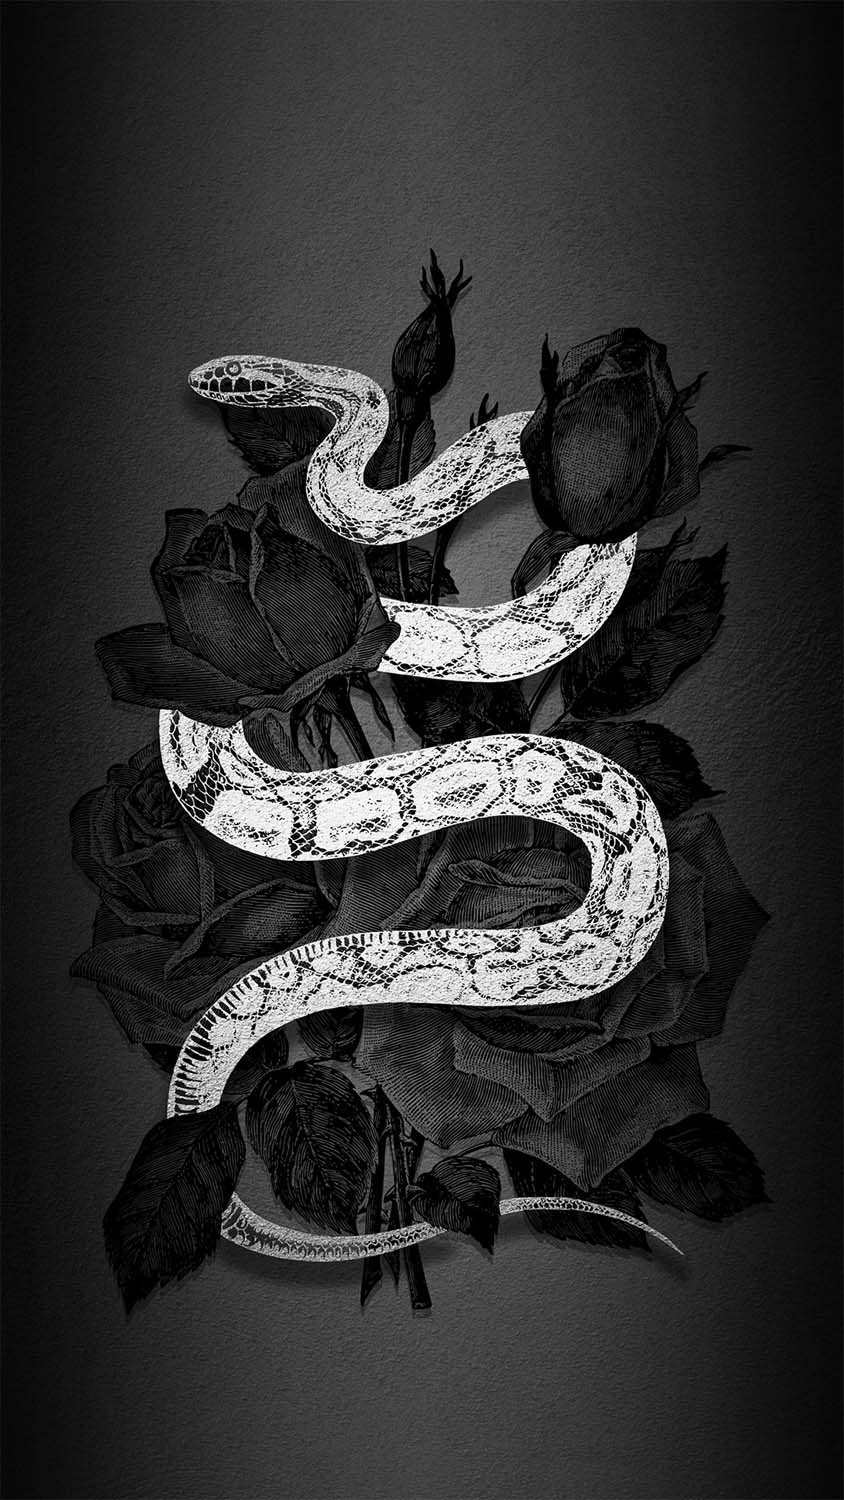 White Snake IPhone Wallpaper HD - IPhone Wallpapers : iPhone Wallpapers